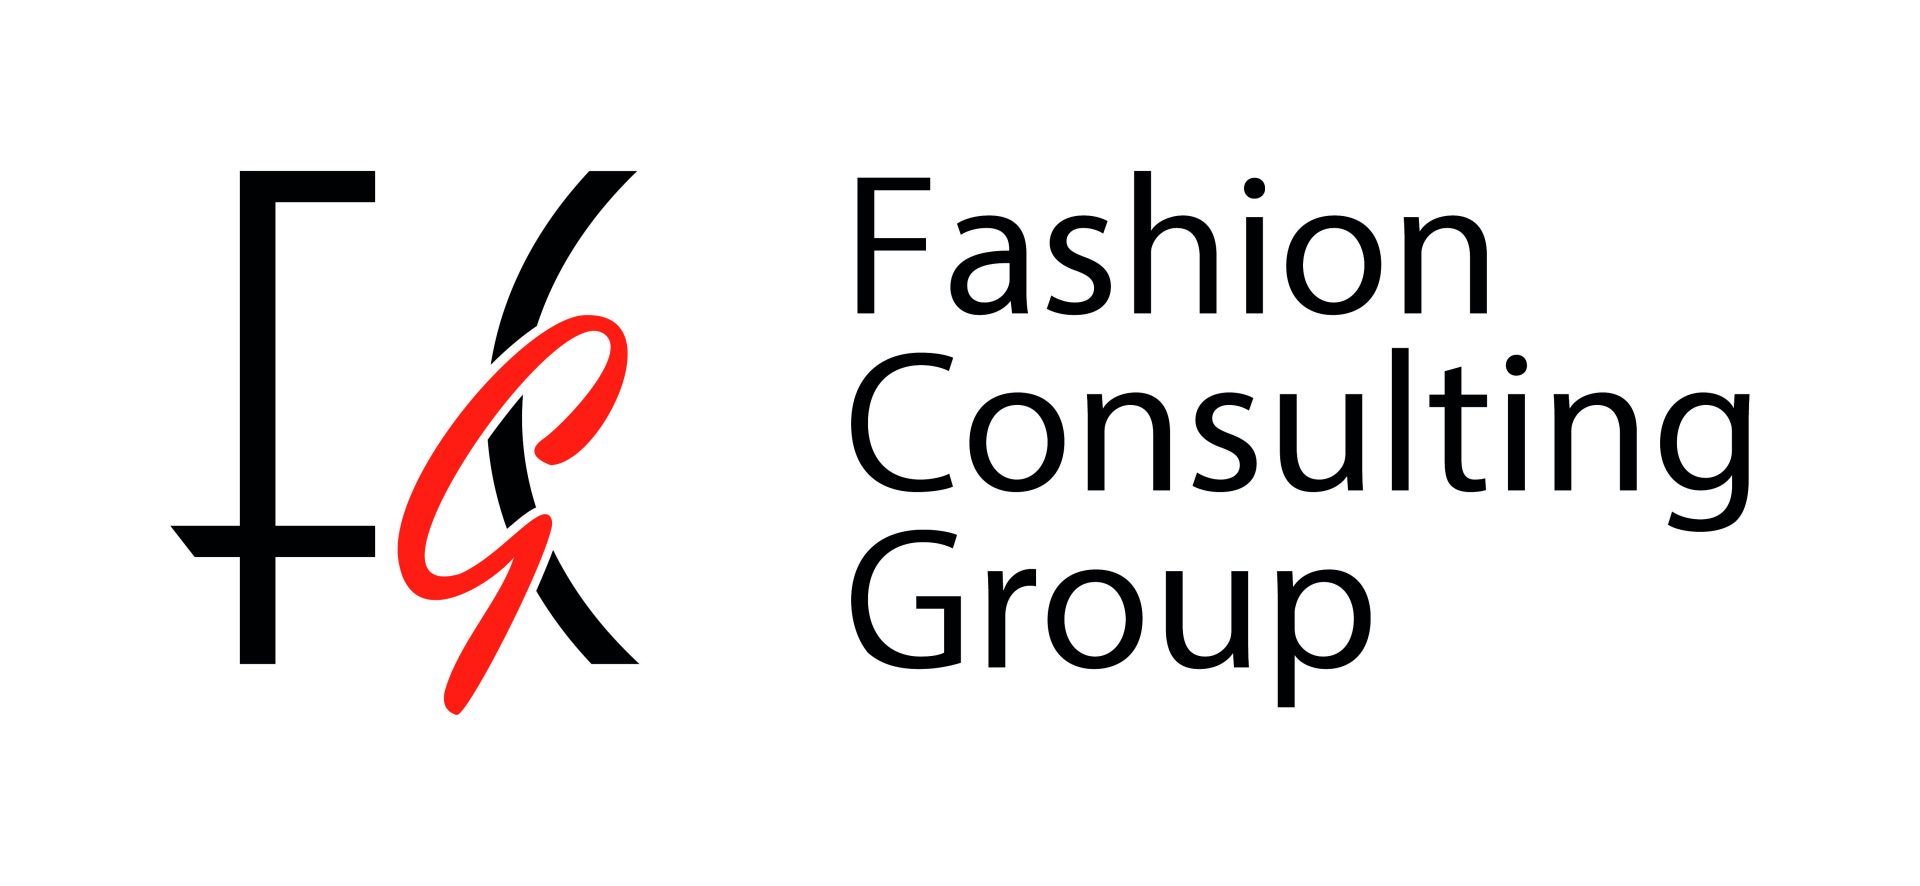 SHOES FOR SHOES BUSINESS FROM FASHION CONSULTING GROUP